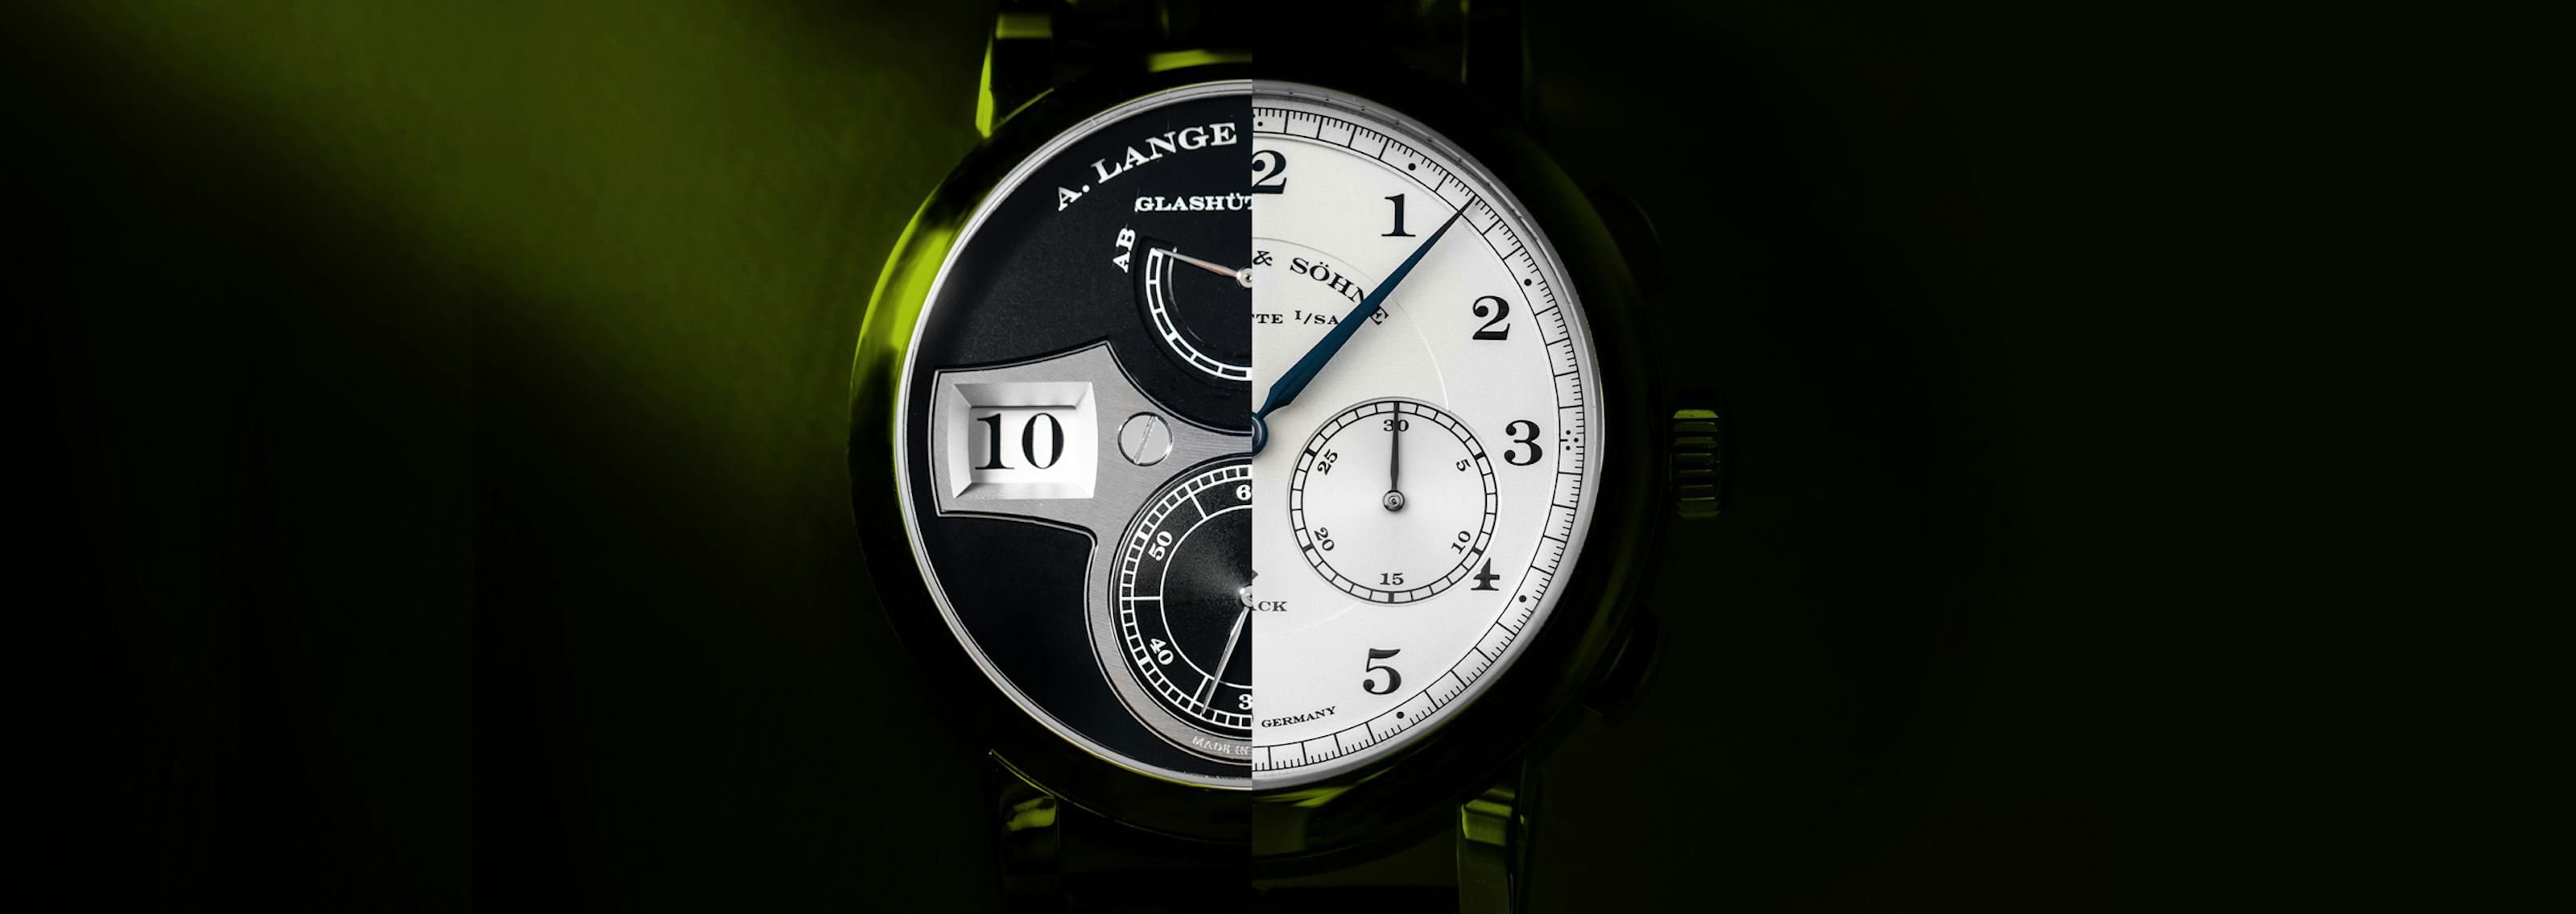 Dr. Jekyll And Mr. Hyde: The Pendulum Swing of A. Lange &#038; Söhne Watch Design